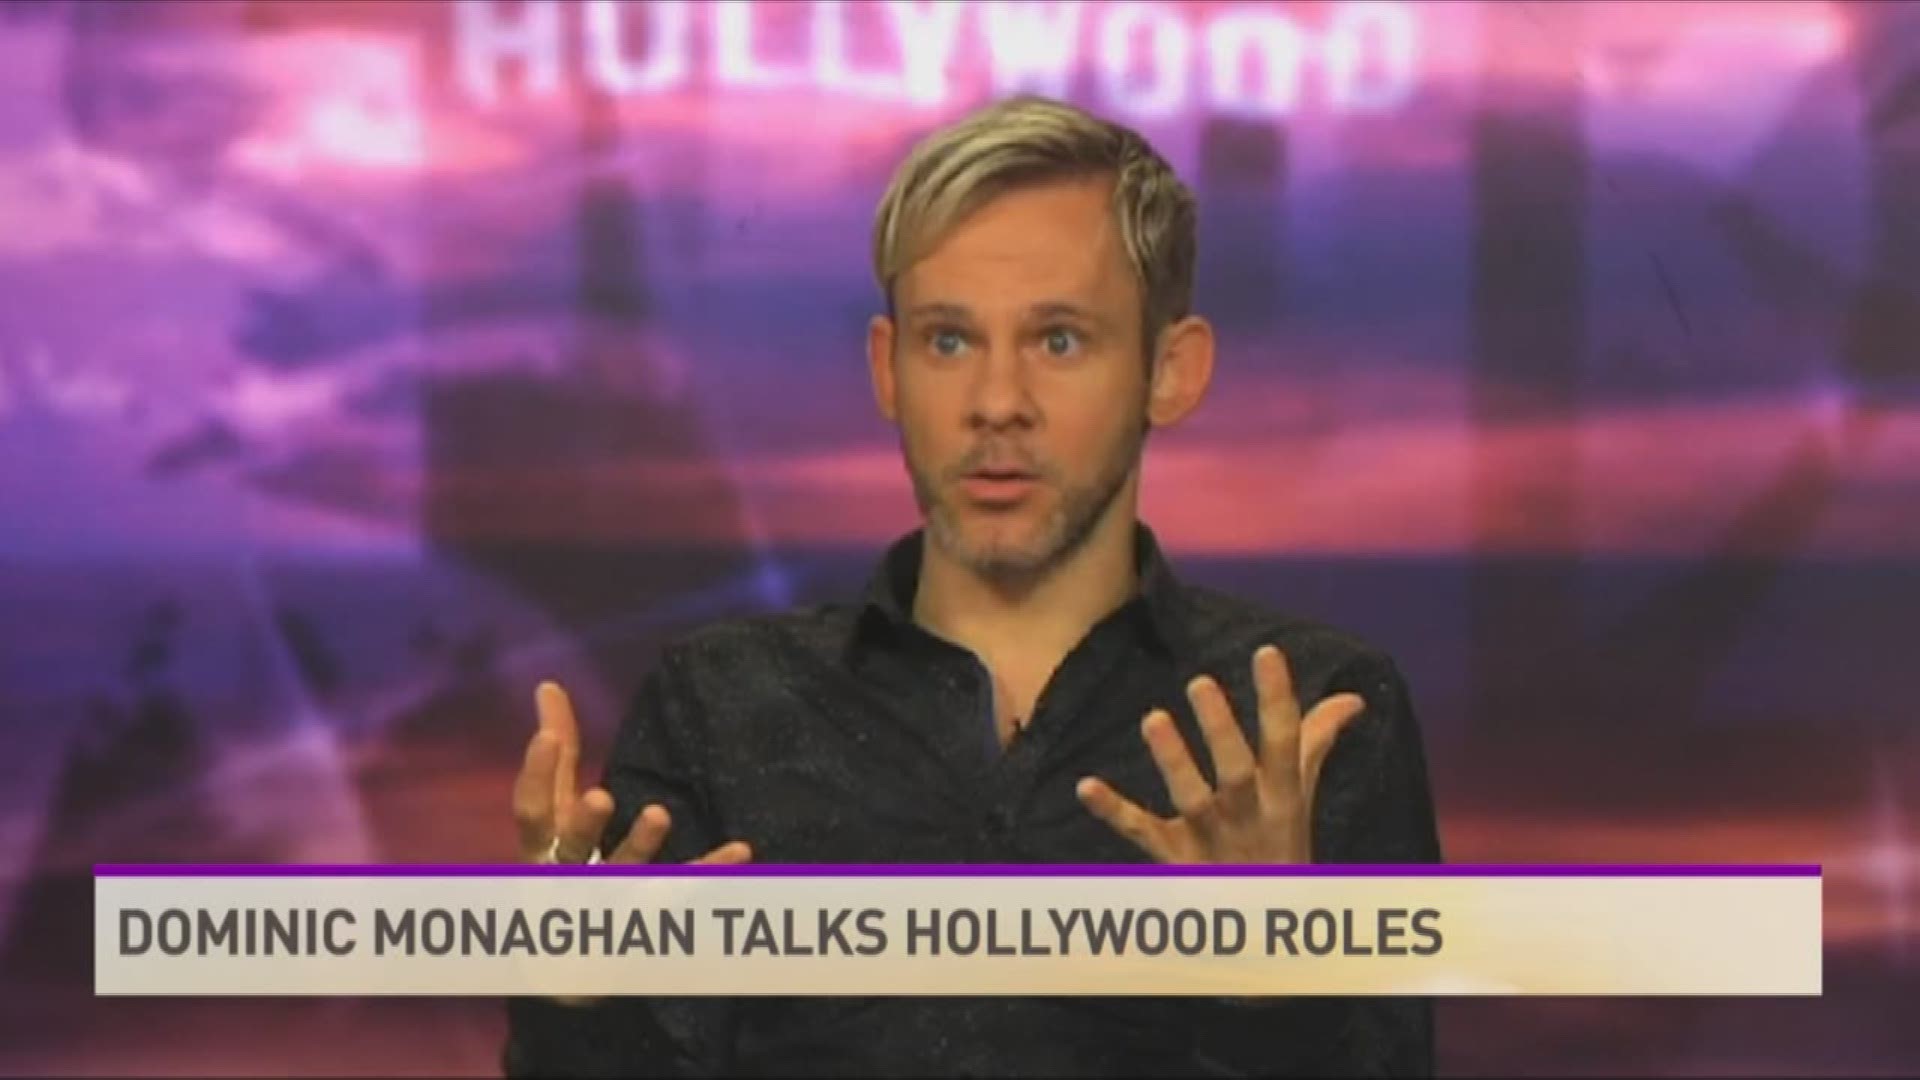 From 'Lost' to 'Lord of the Rings,' Dominic Monaghan continues to cement his reputation in the entertainment industry.